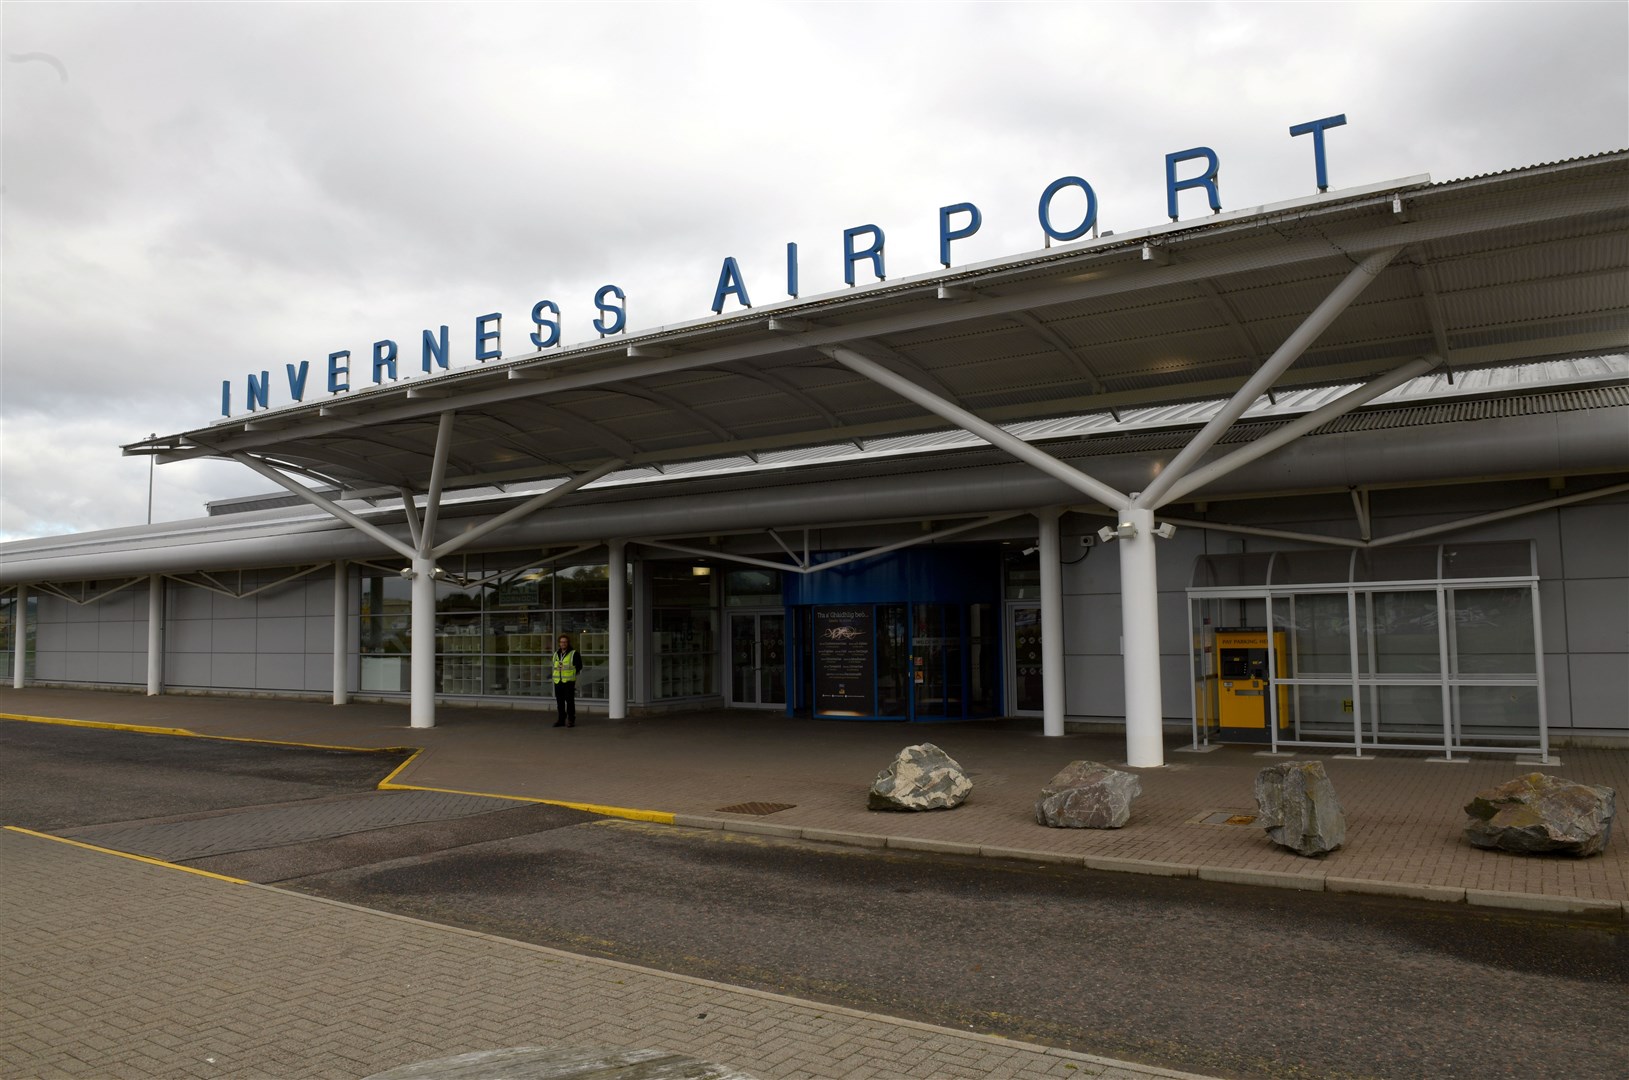 Inverness Airport which is operated by Highland and Islands Airport Limited (HIAL).